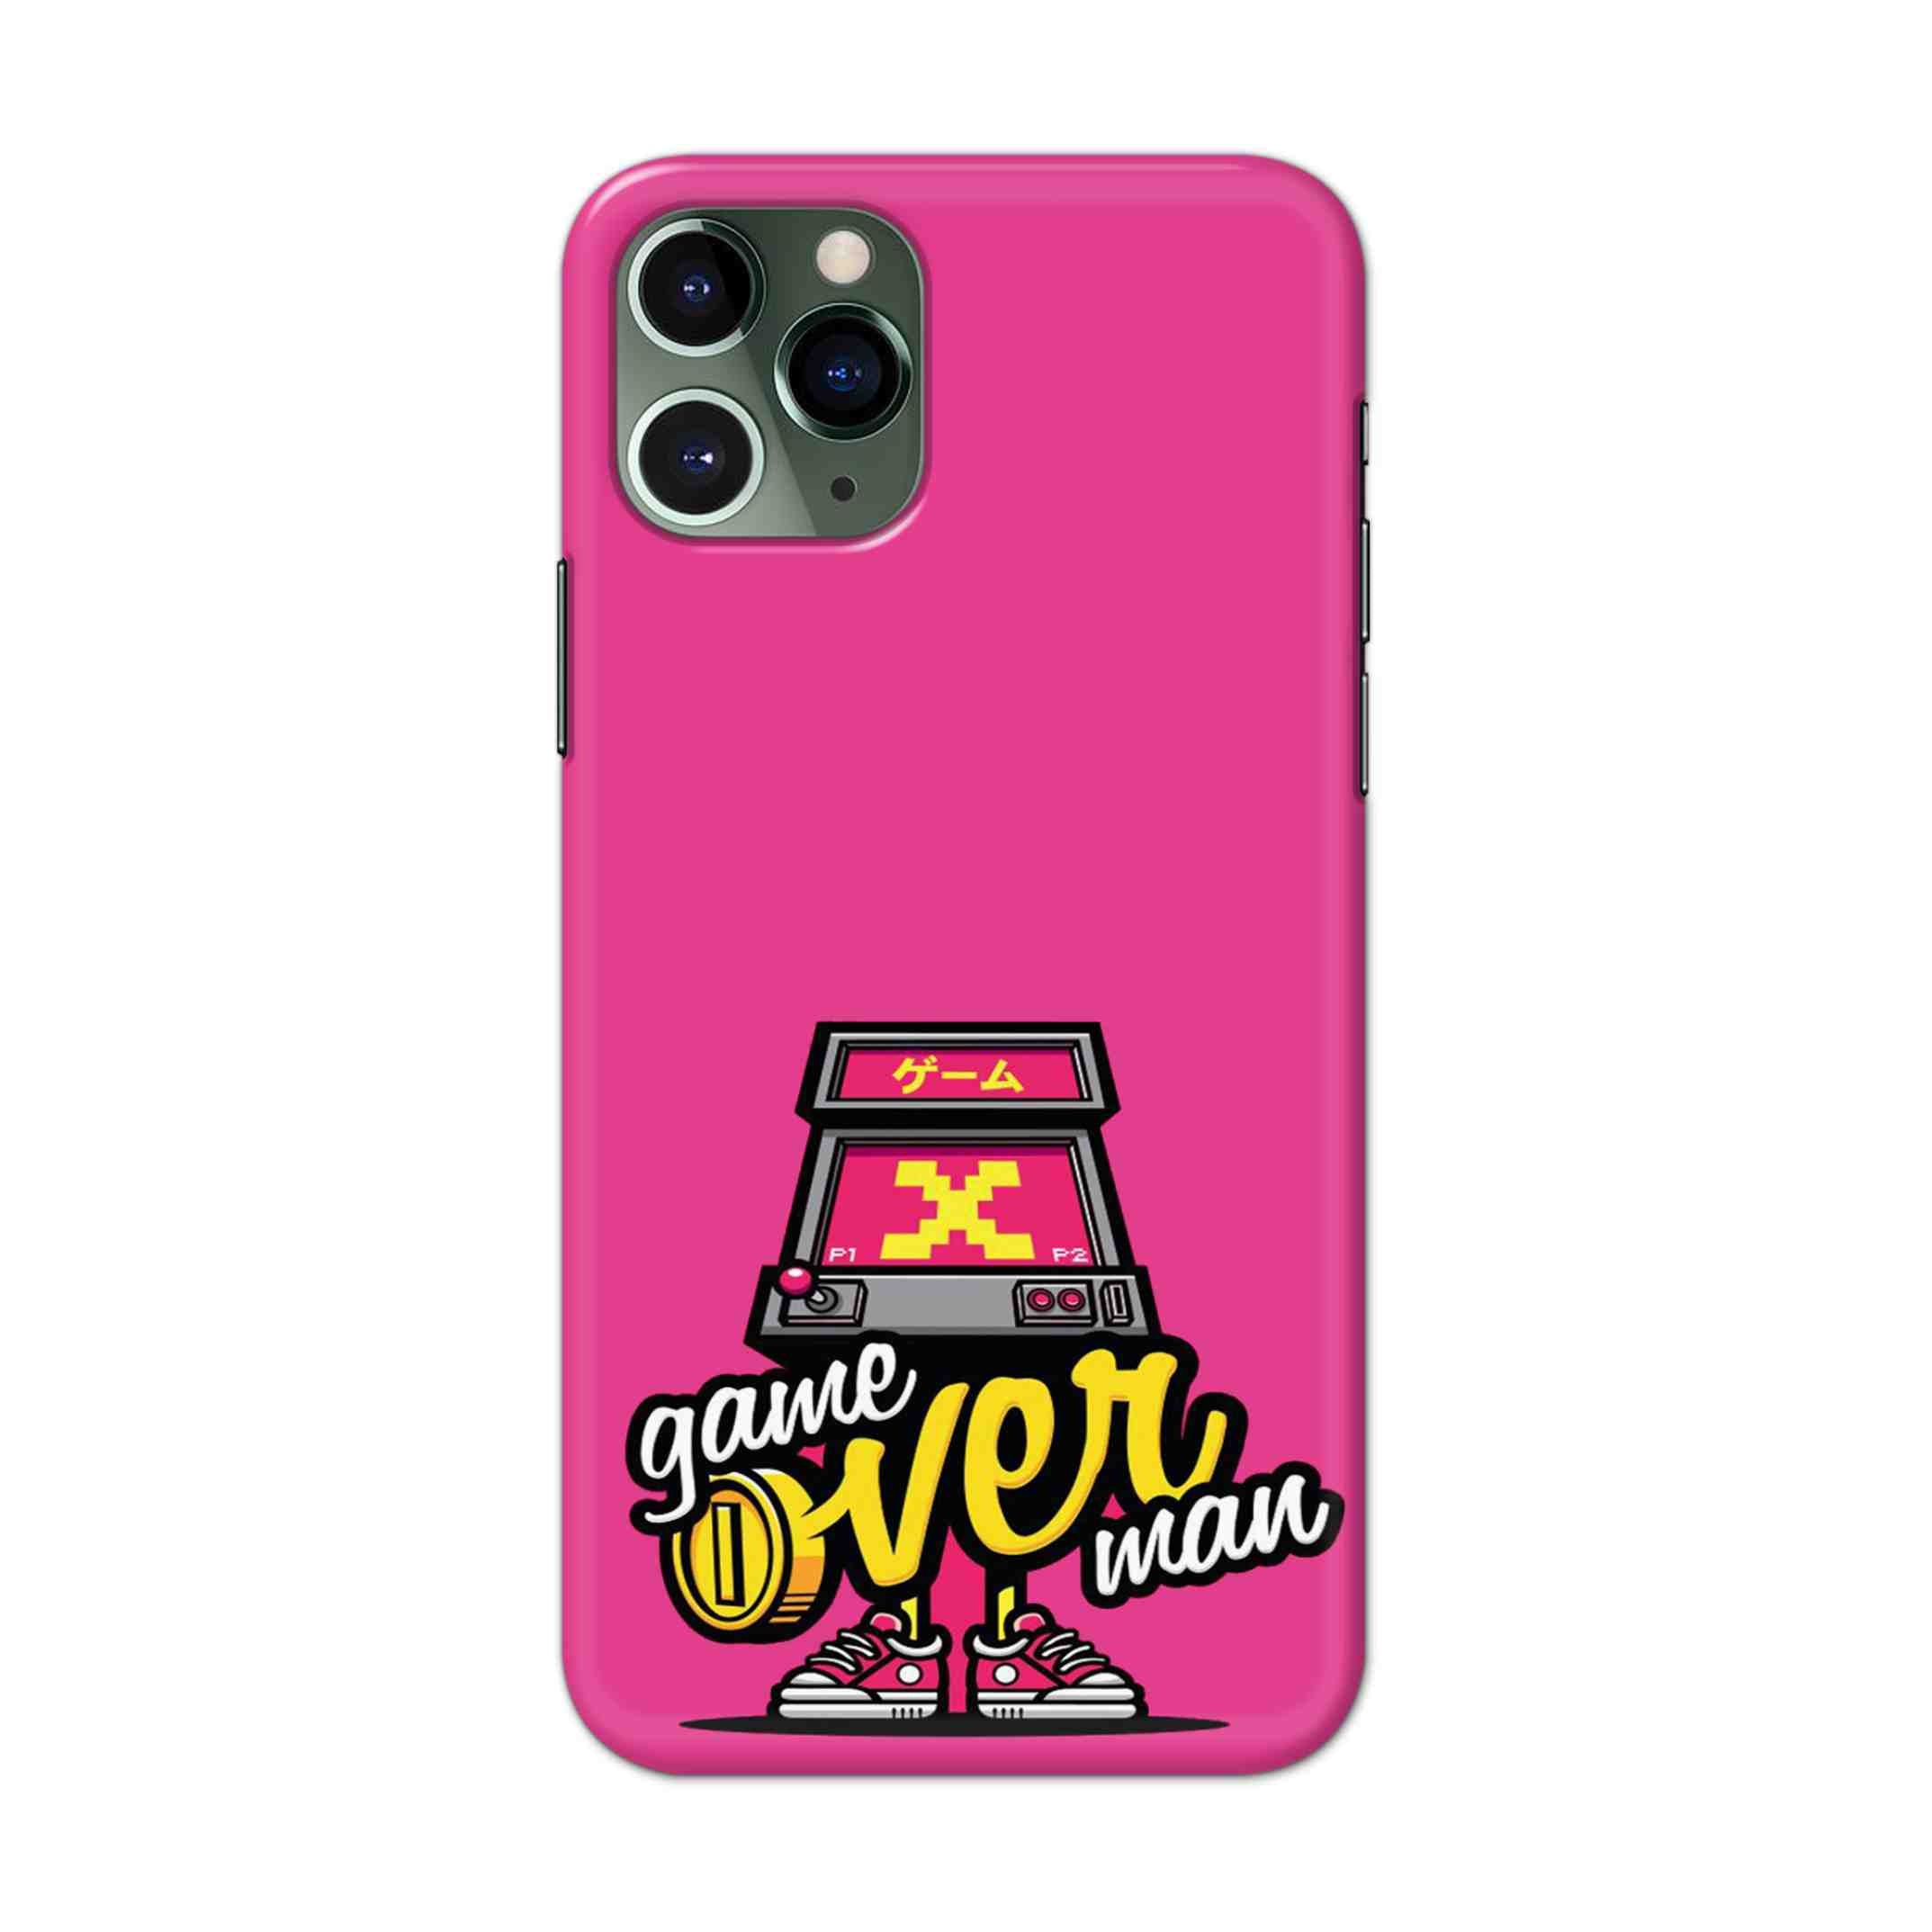 Buy Game Over Man Hard Back Mobile Phone Case/Cover For iPhone 11 Pro Online